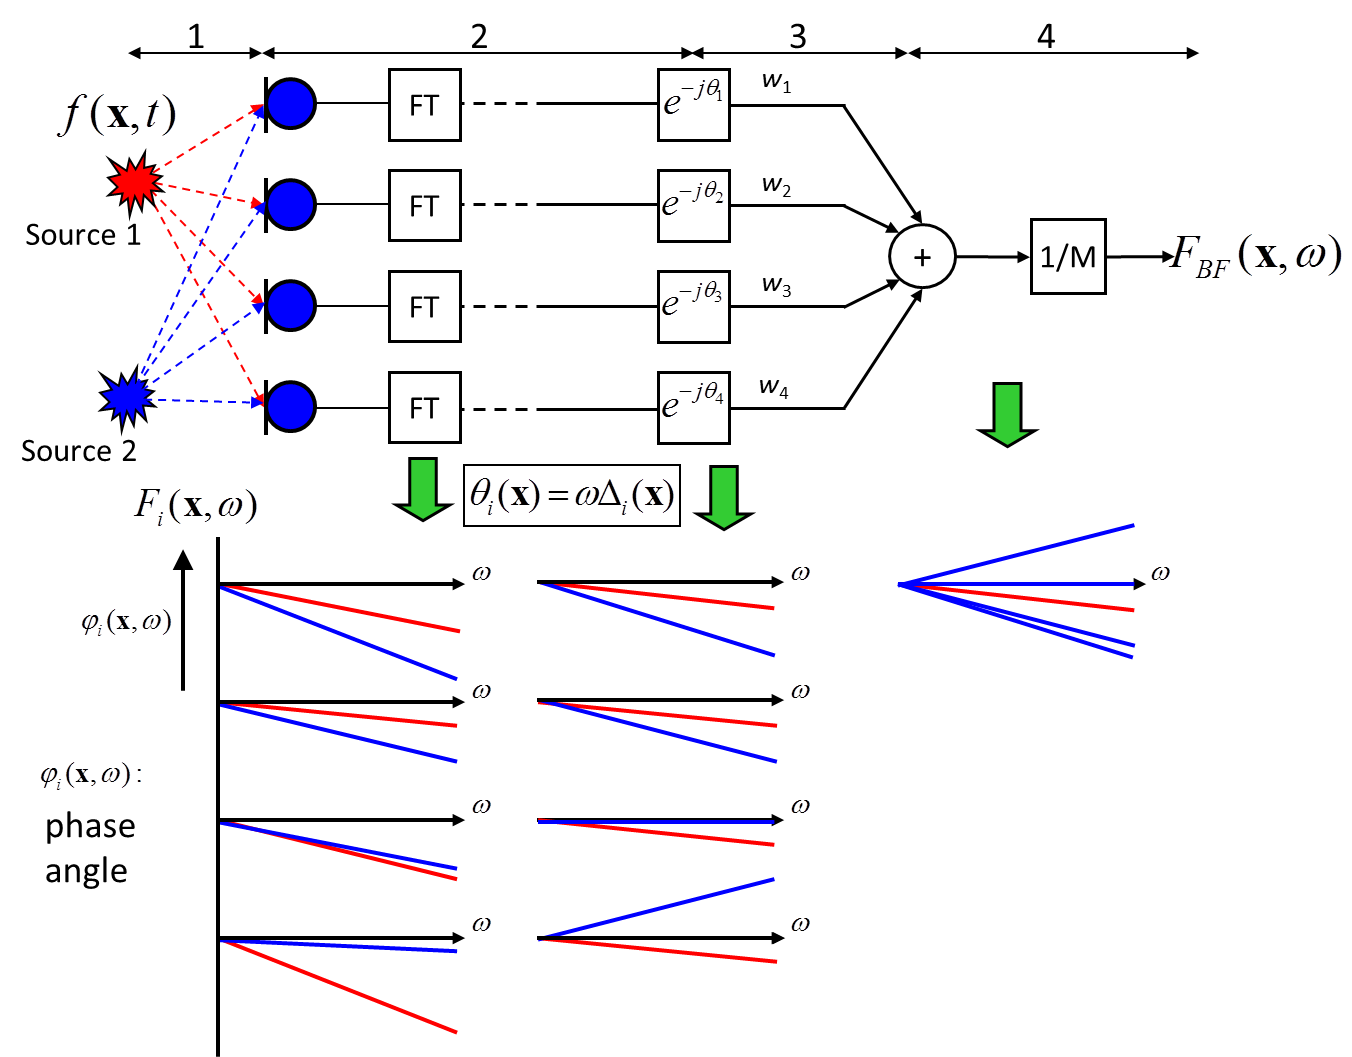 Fig. 1: Signal flow of delay-and-sum beamforming in the frequency domain